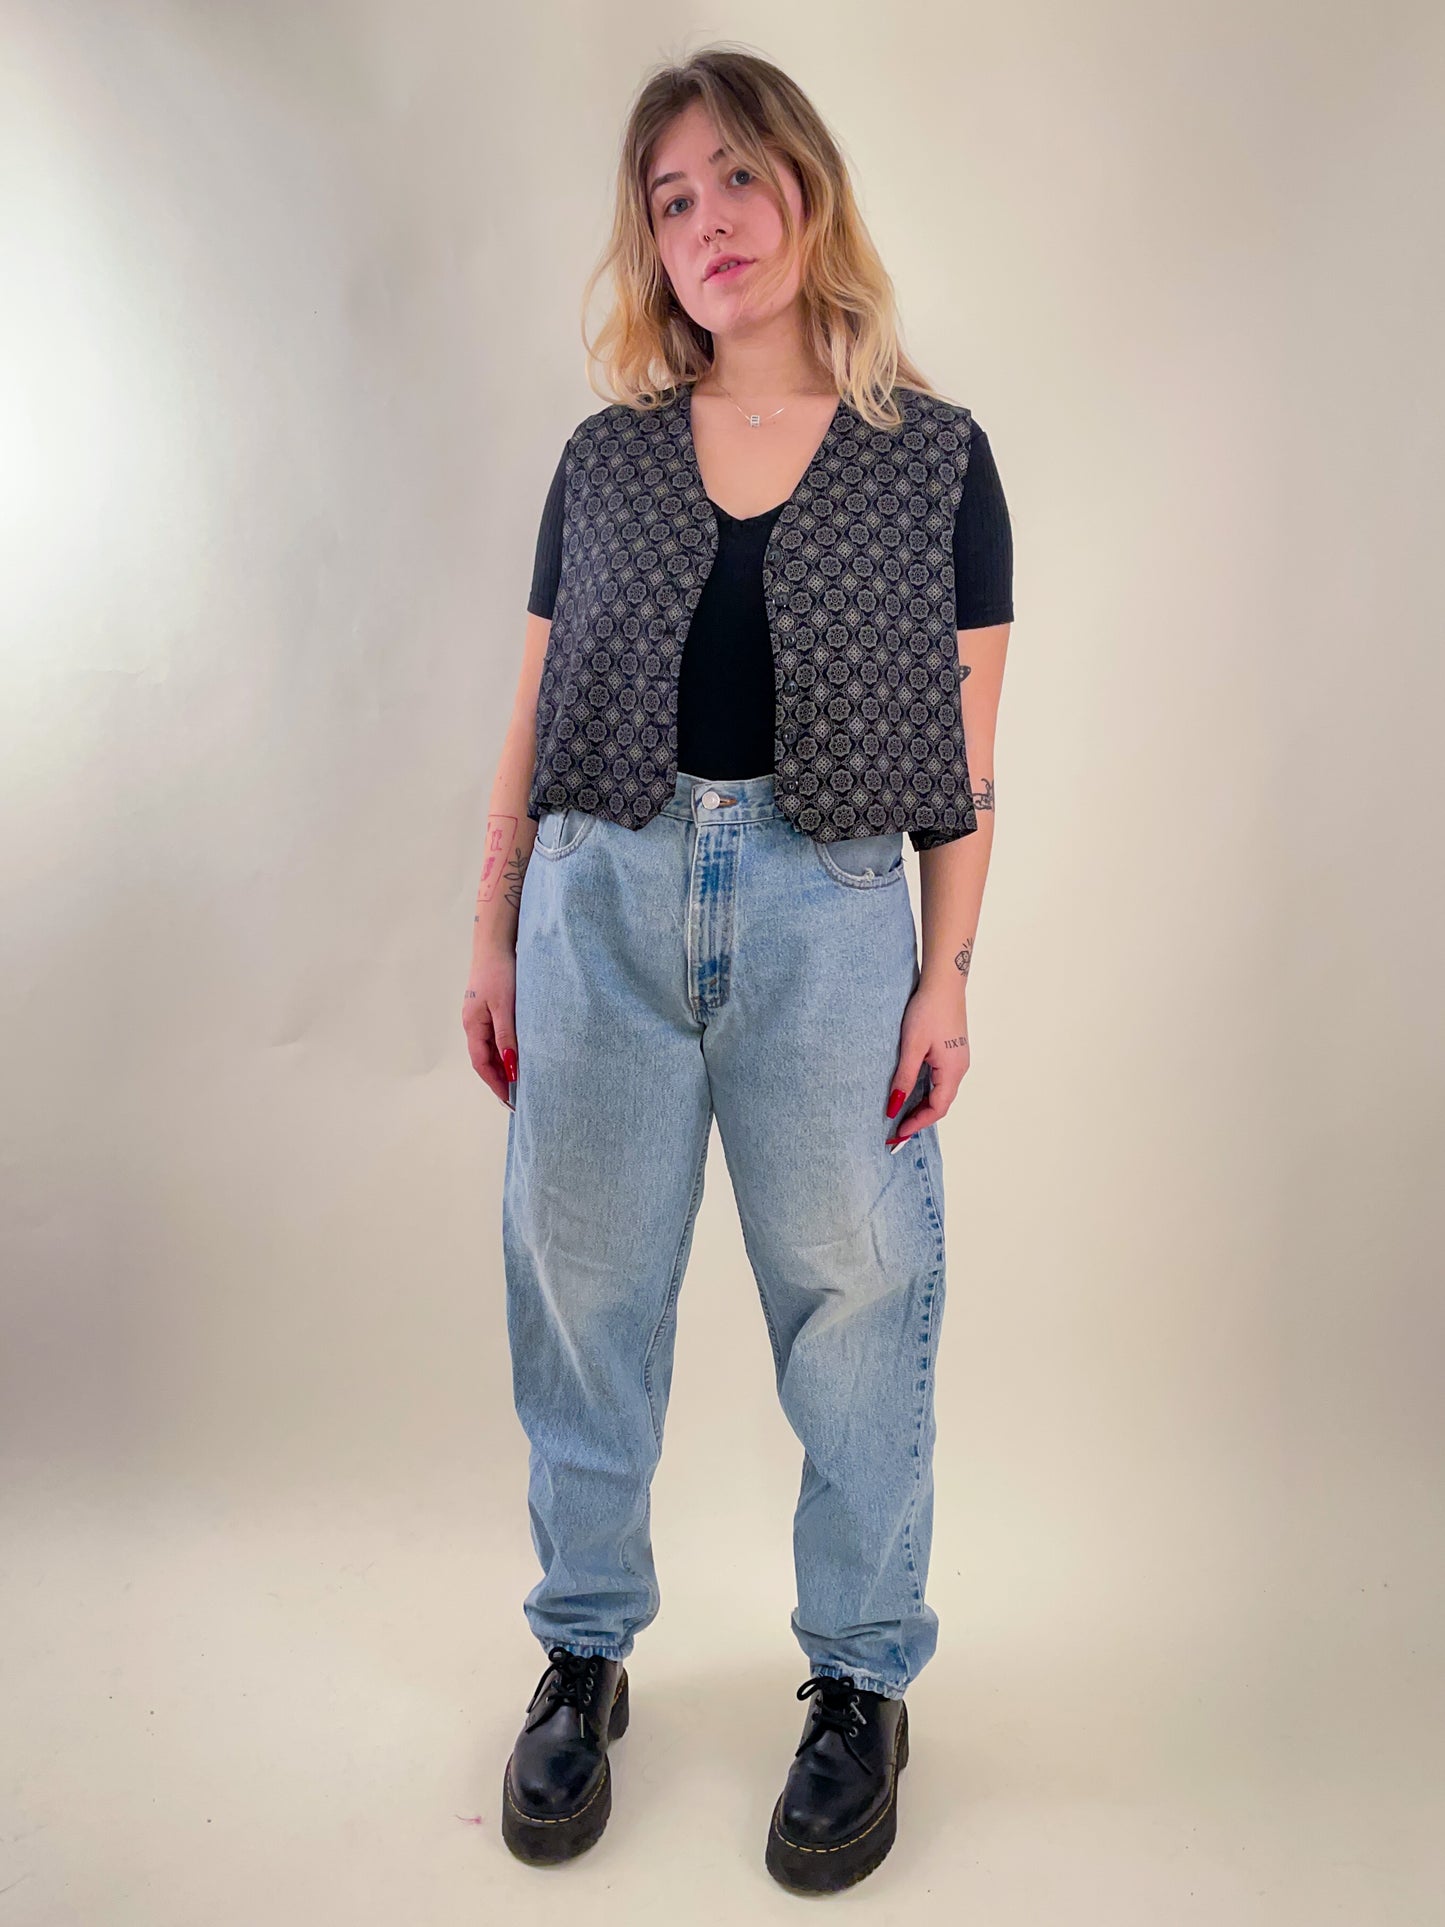 90s Mixed Print Cropped Vest (XXL)